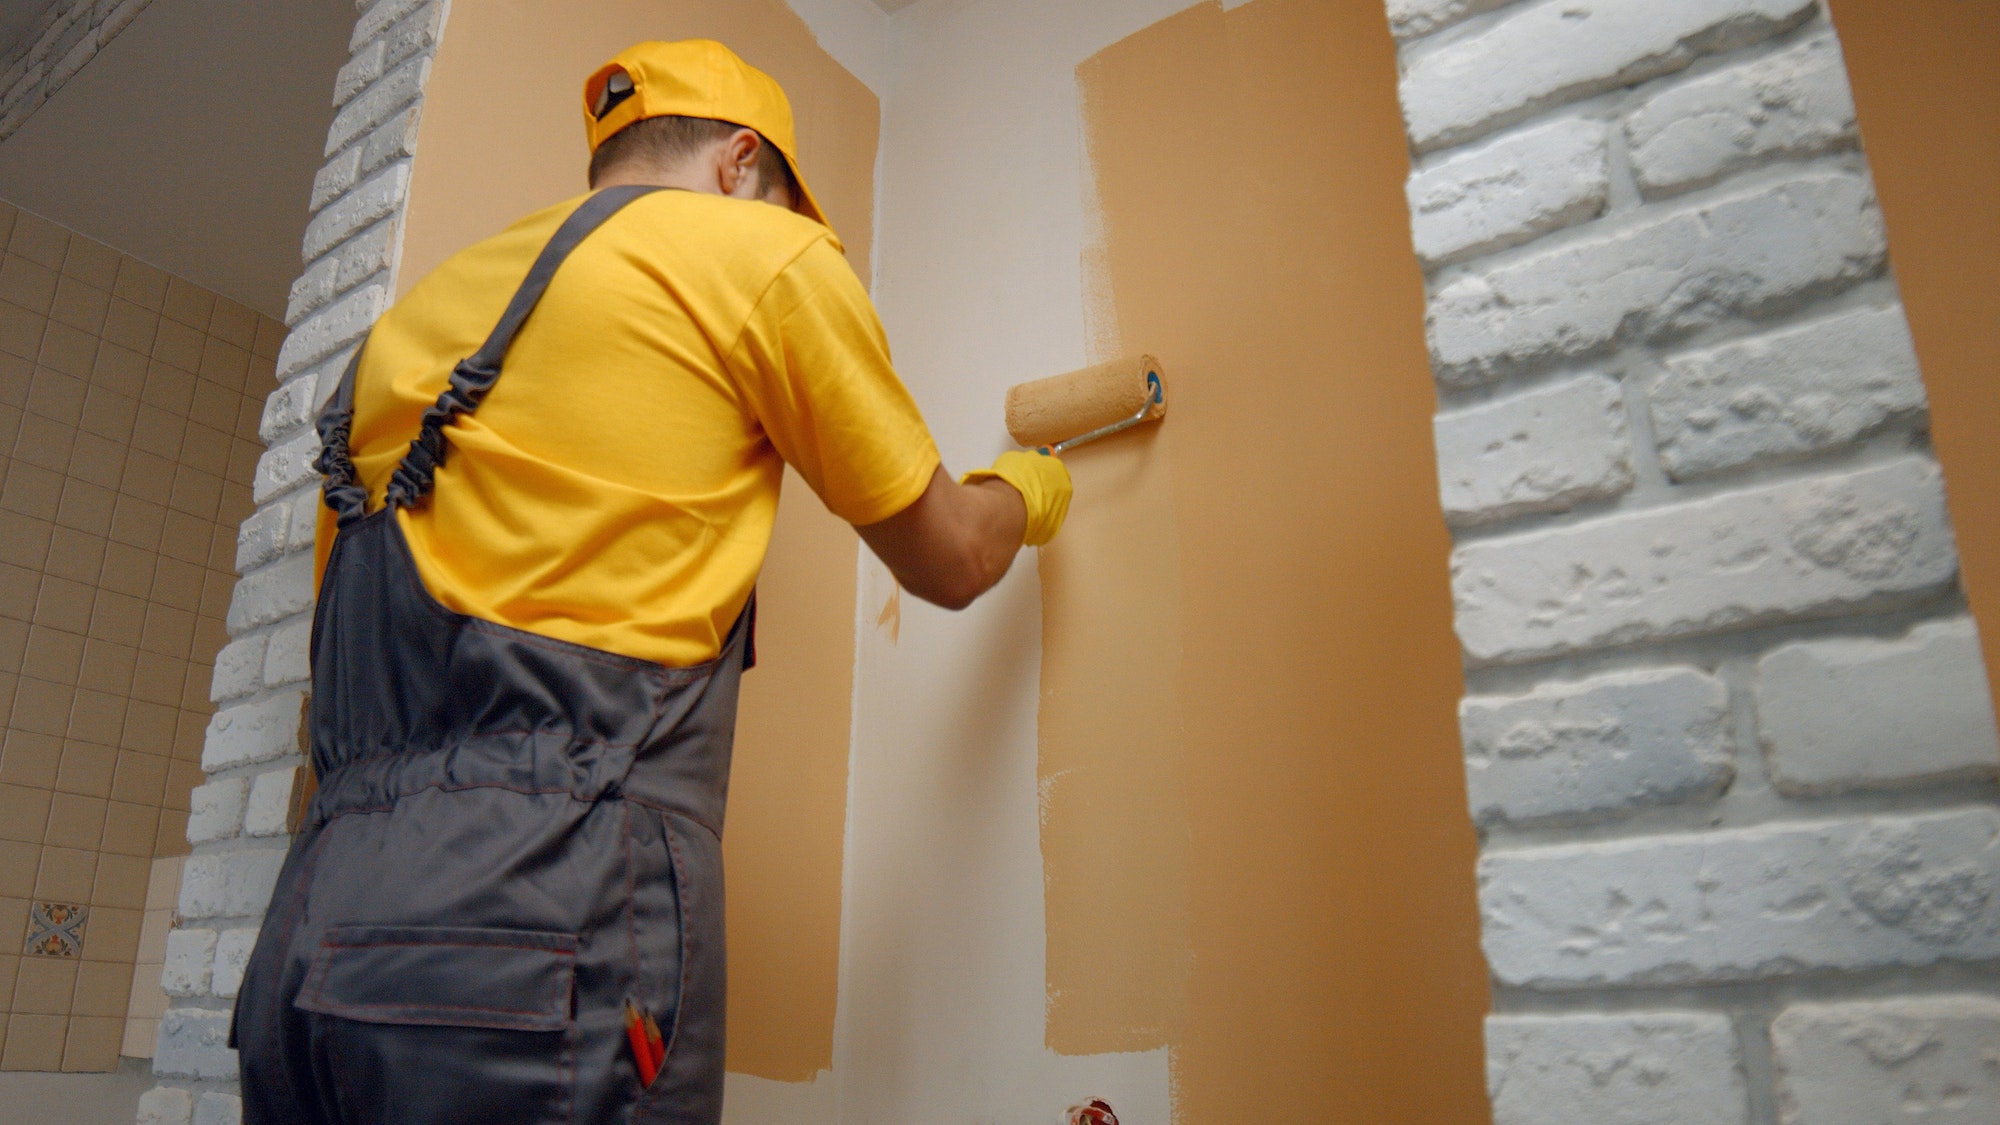 Worker painting wall with paint roller.